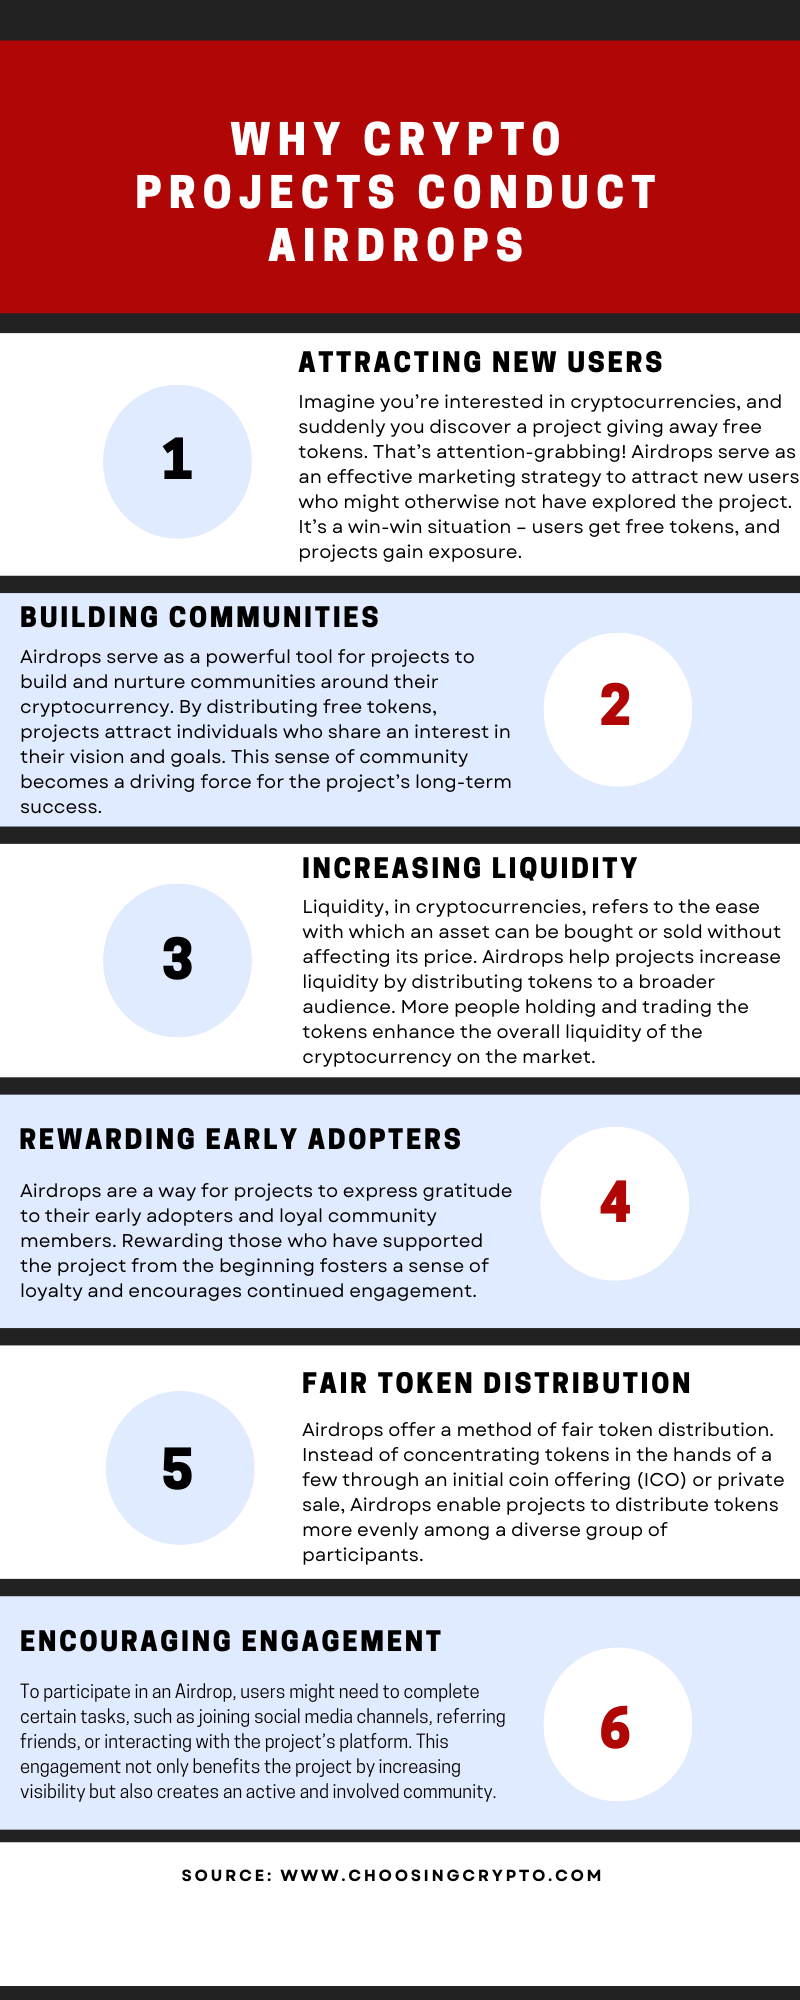 Why Crypto Projects Conduct Airdrops